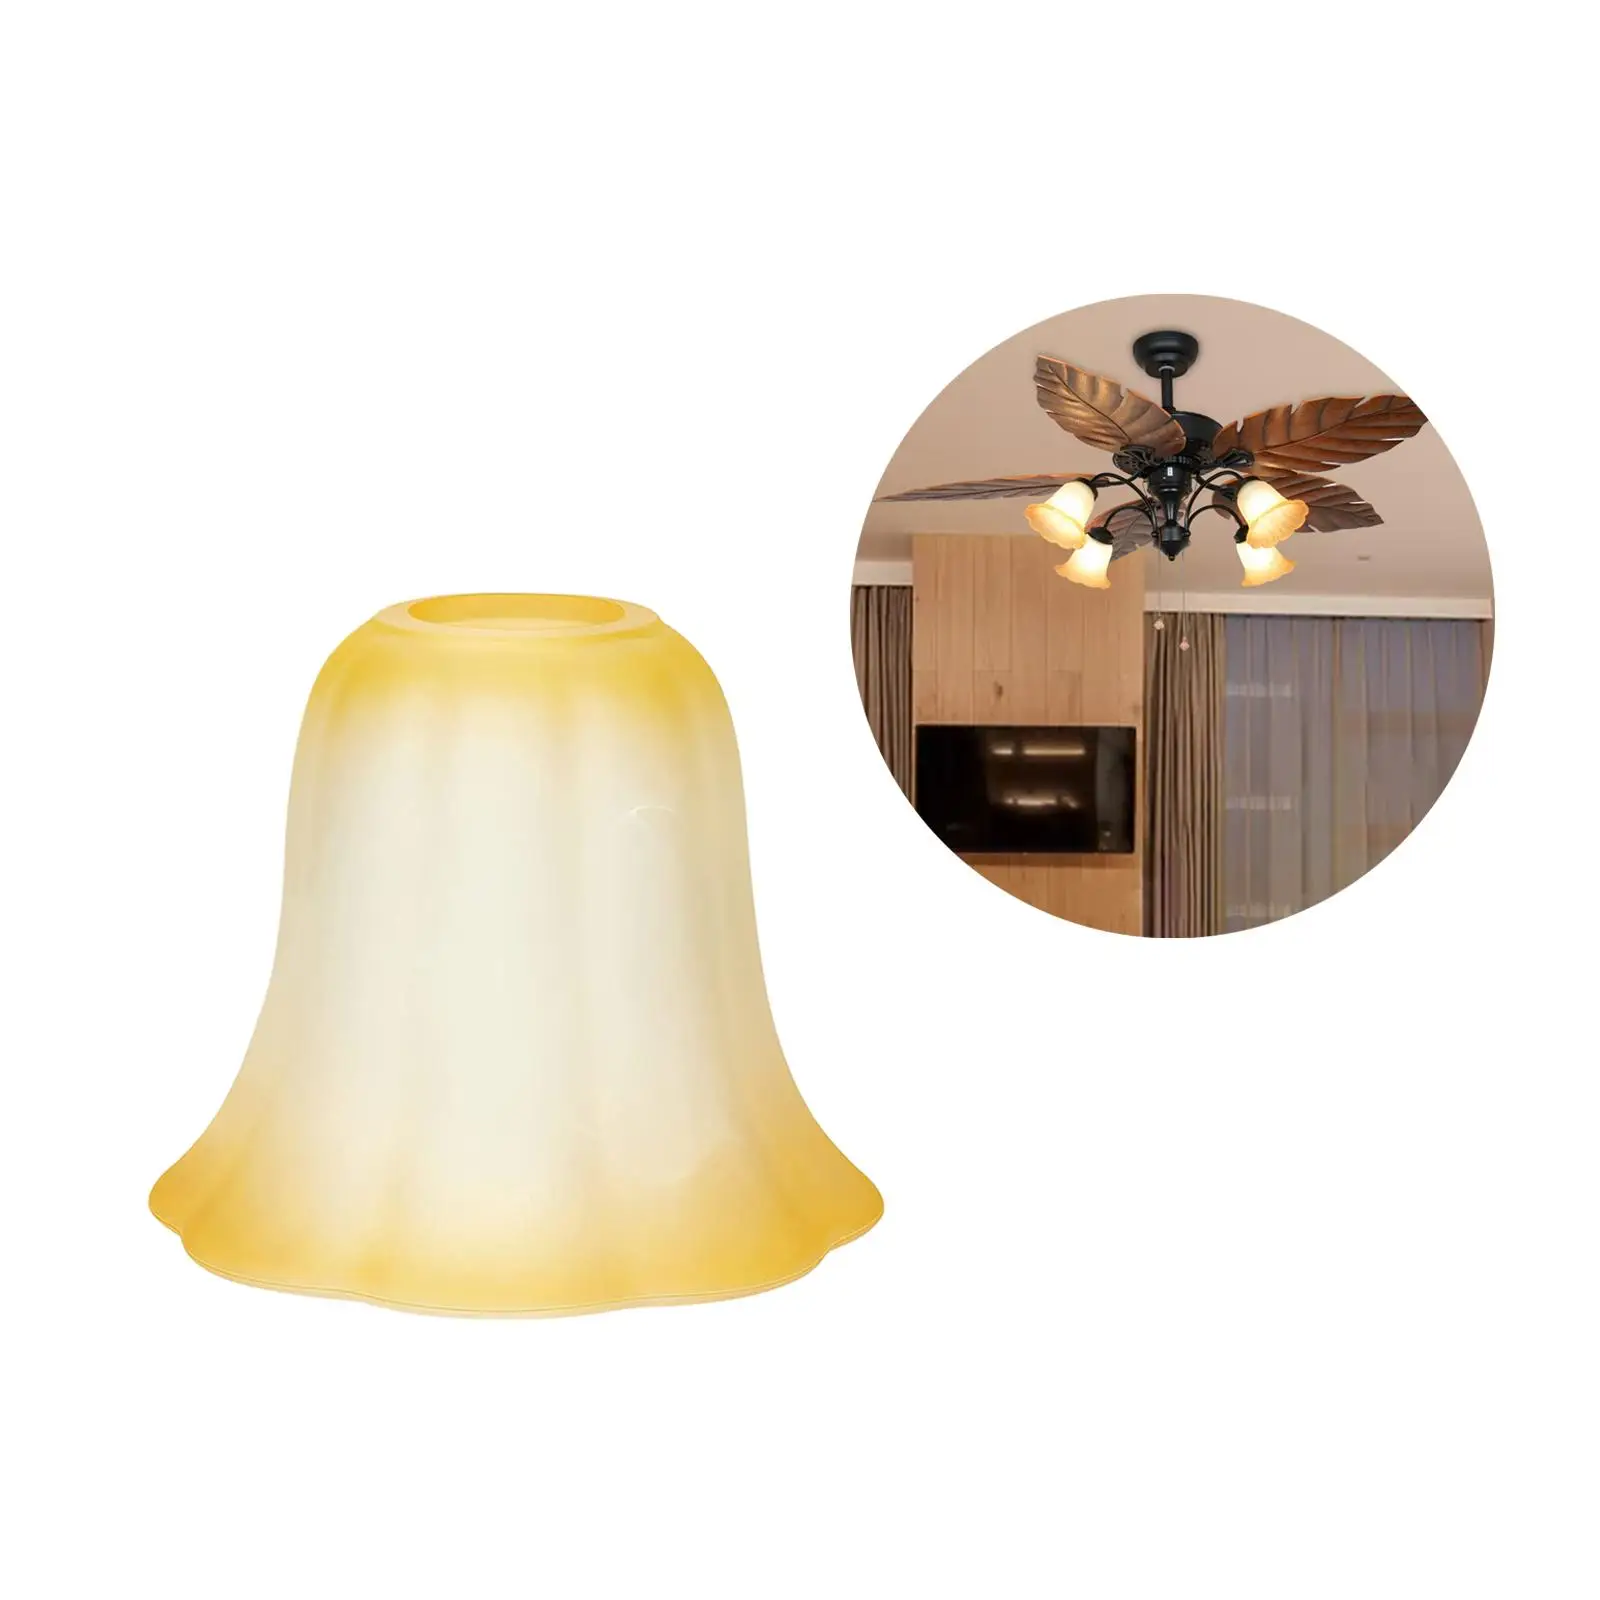 Bell Shaped Ceiling Light Fixture Cover Droplight Frosted Glass Lamp Shade